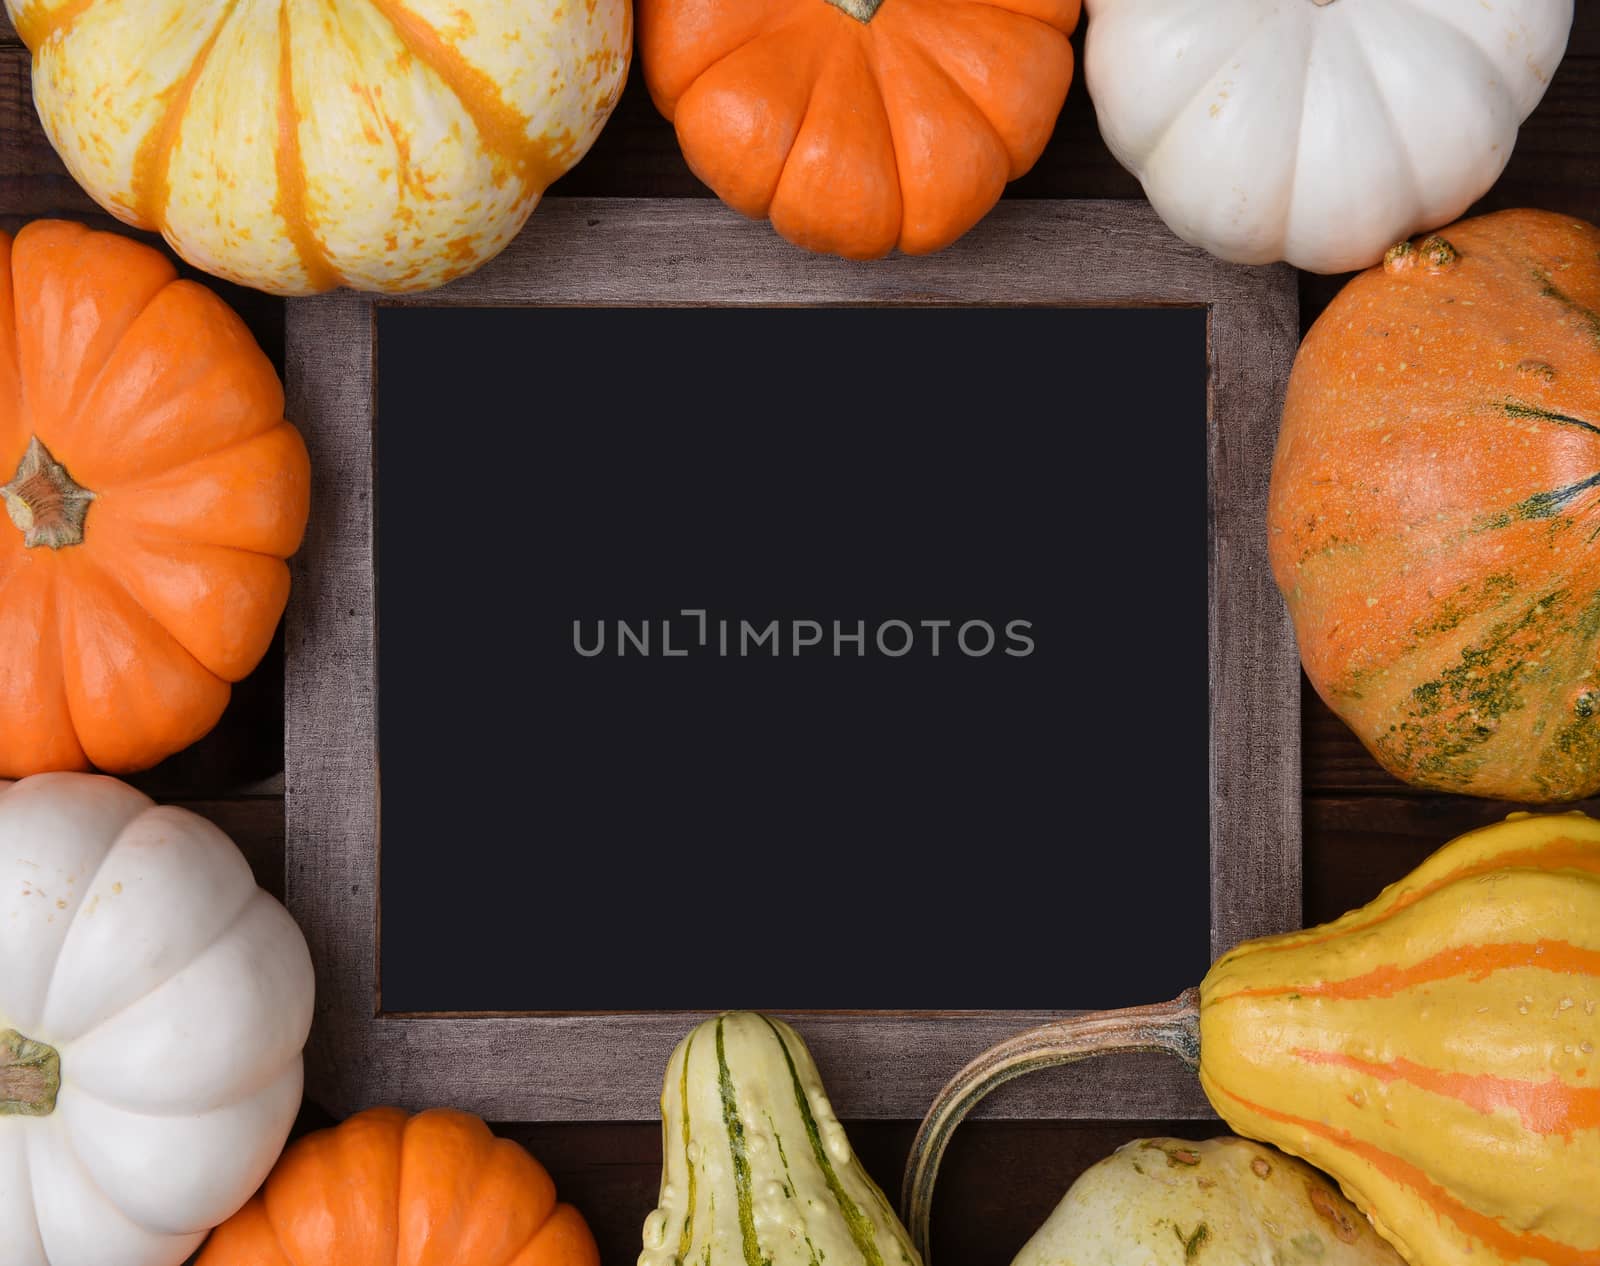 Overhead view of a group of assorted Autumn pumpkins, gourds and squash surrounding a blank chalkboard.